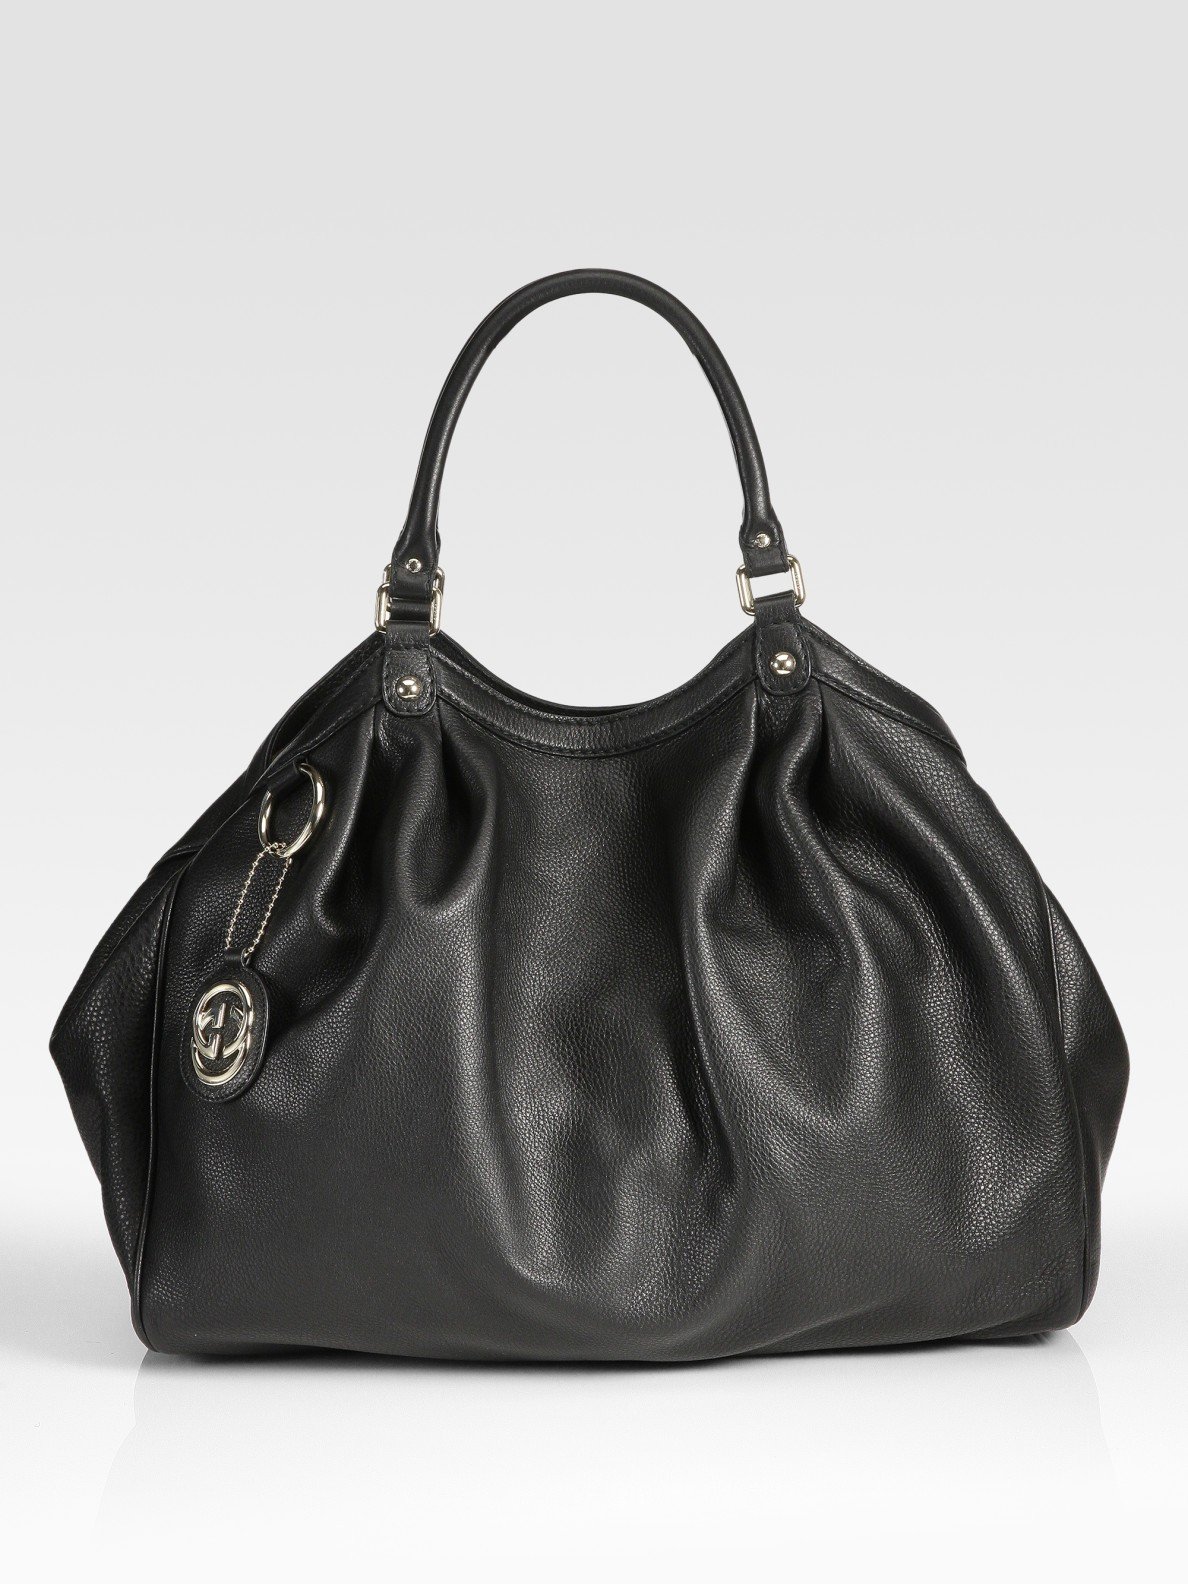 Gucci Sukey Large Tote Bag in Black | Lyst